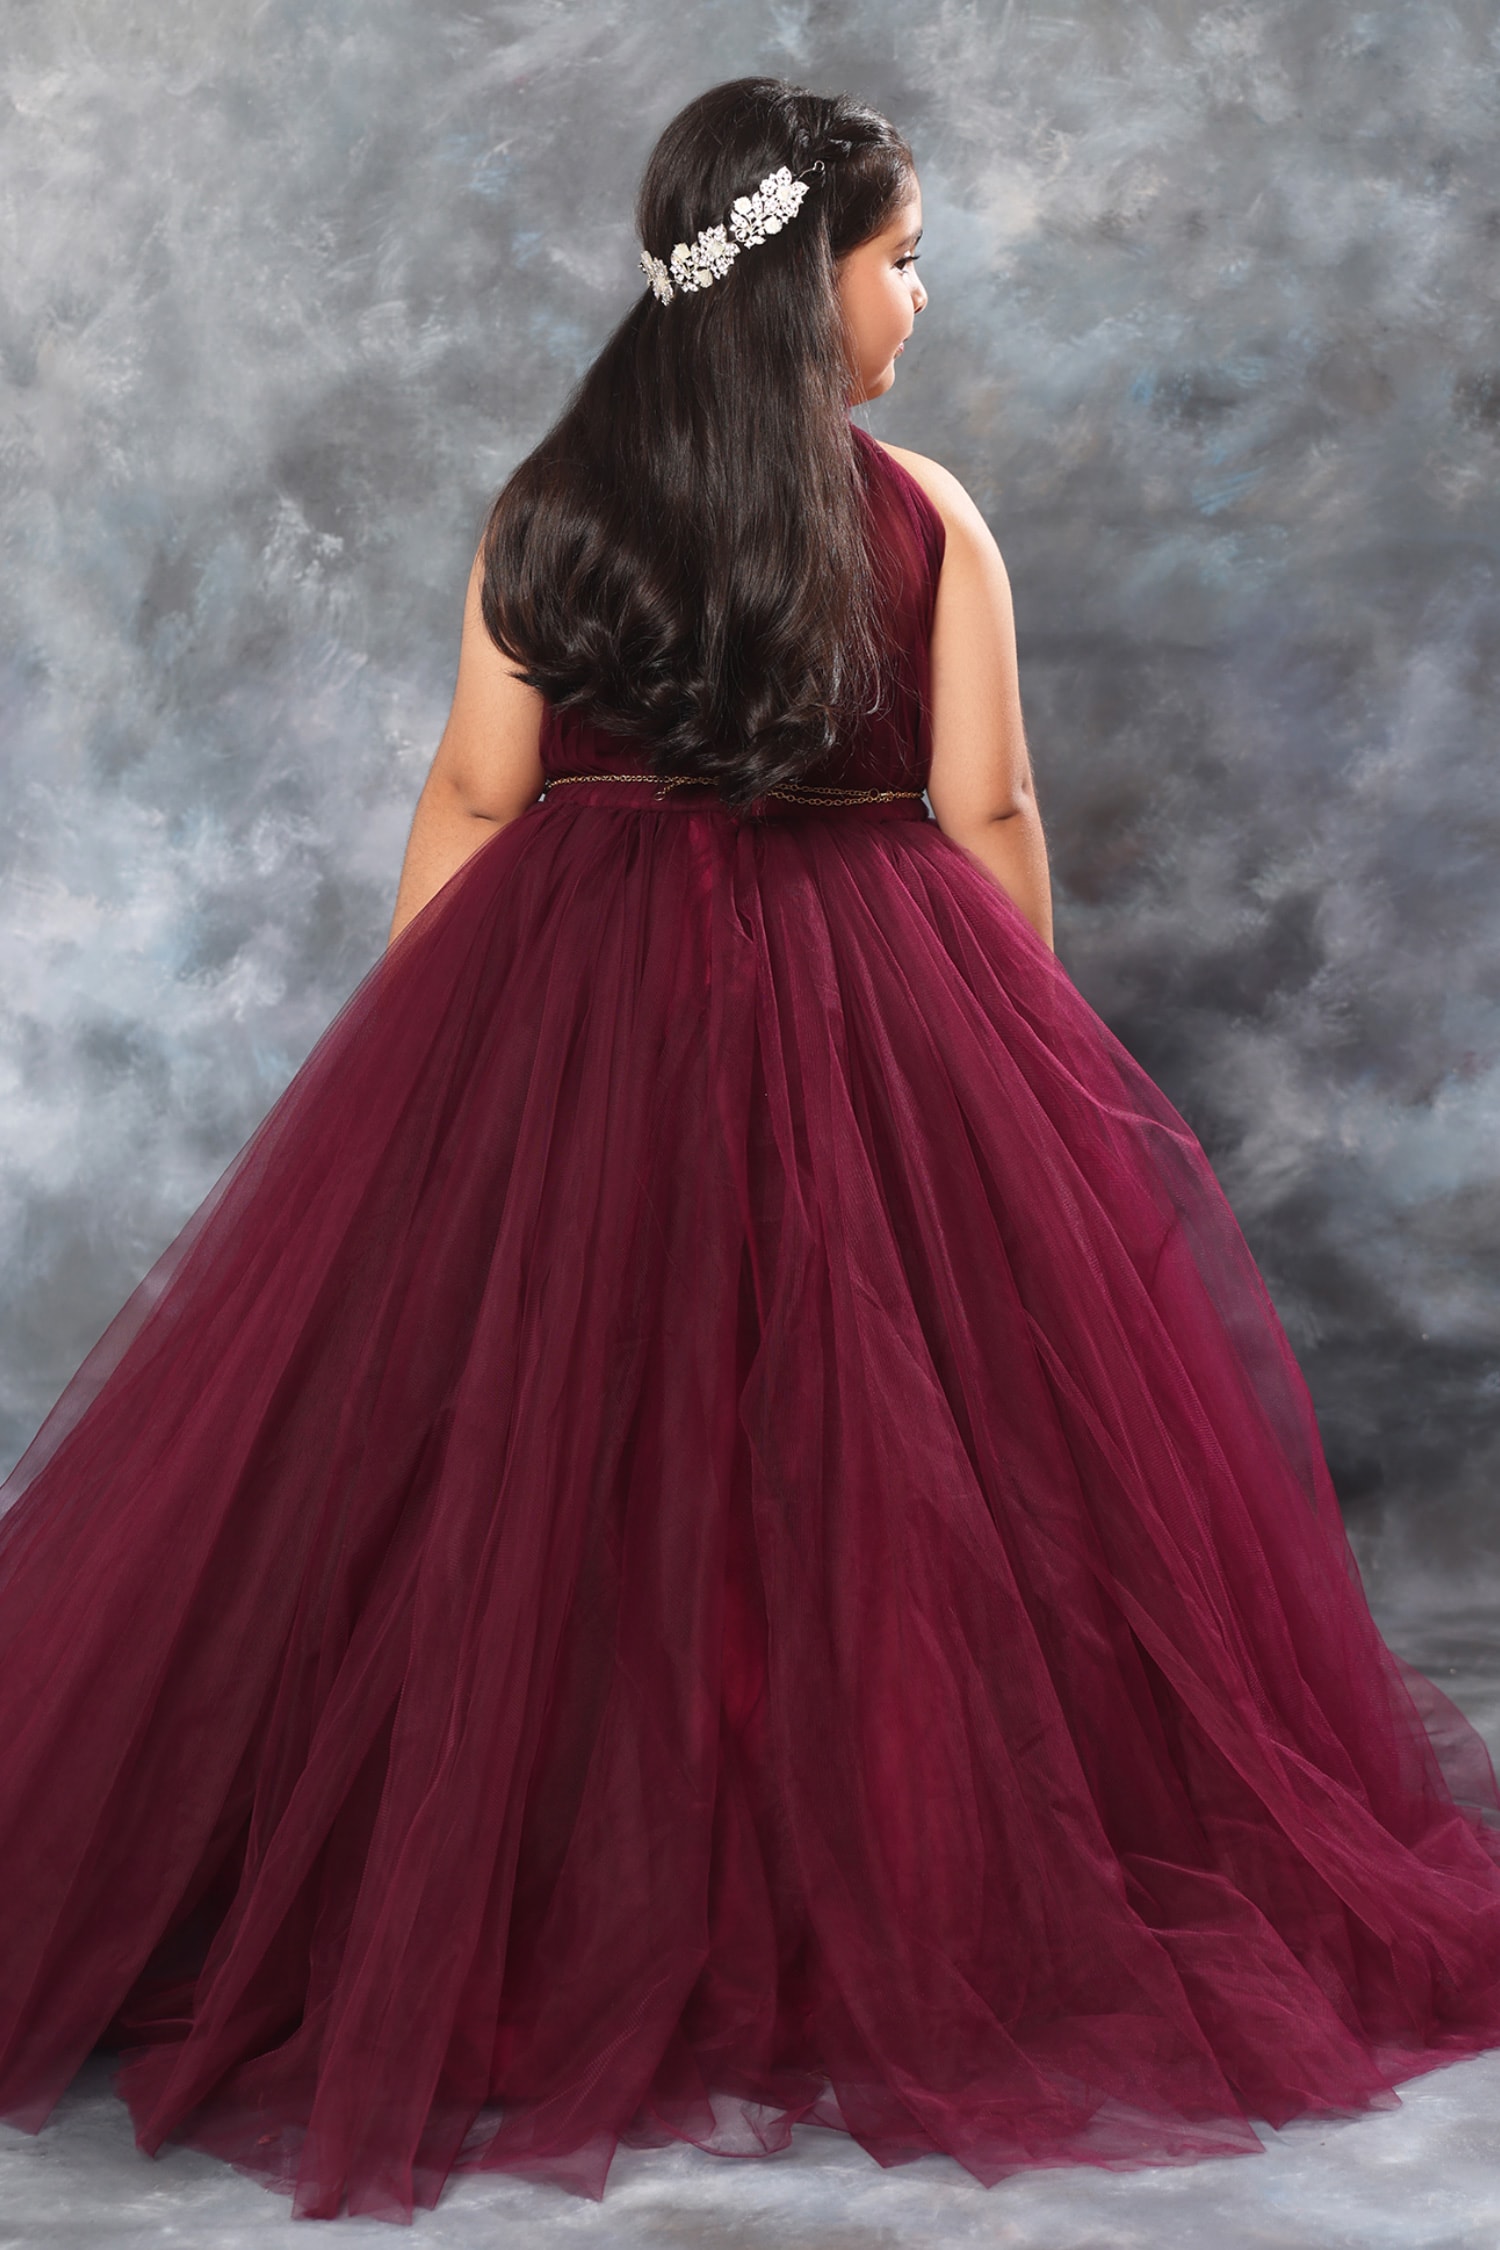 Burgundy Satin Ball Gown Wedding Dresses Lace Long Sleeves | Burgundy  wedding dress, Red prom dress long, Red prom dress